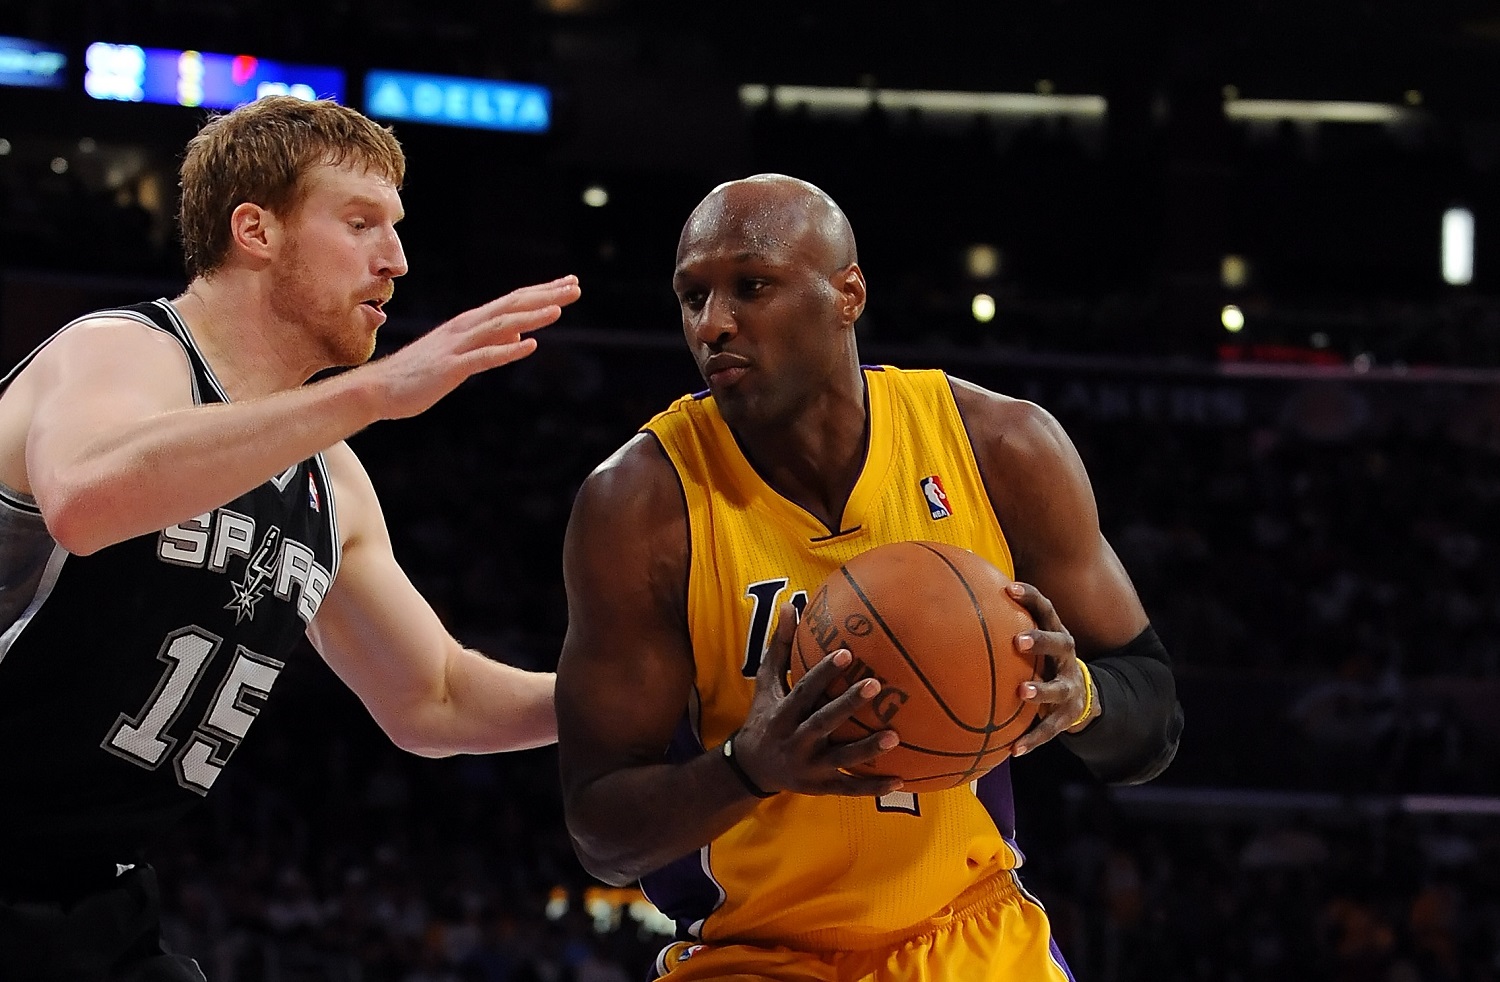 Lamar Odom won a pair of NBA championships with the Los Angeles Lakers, but his performance dropped off significantly after a trade to the Dallas Mavericks.